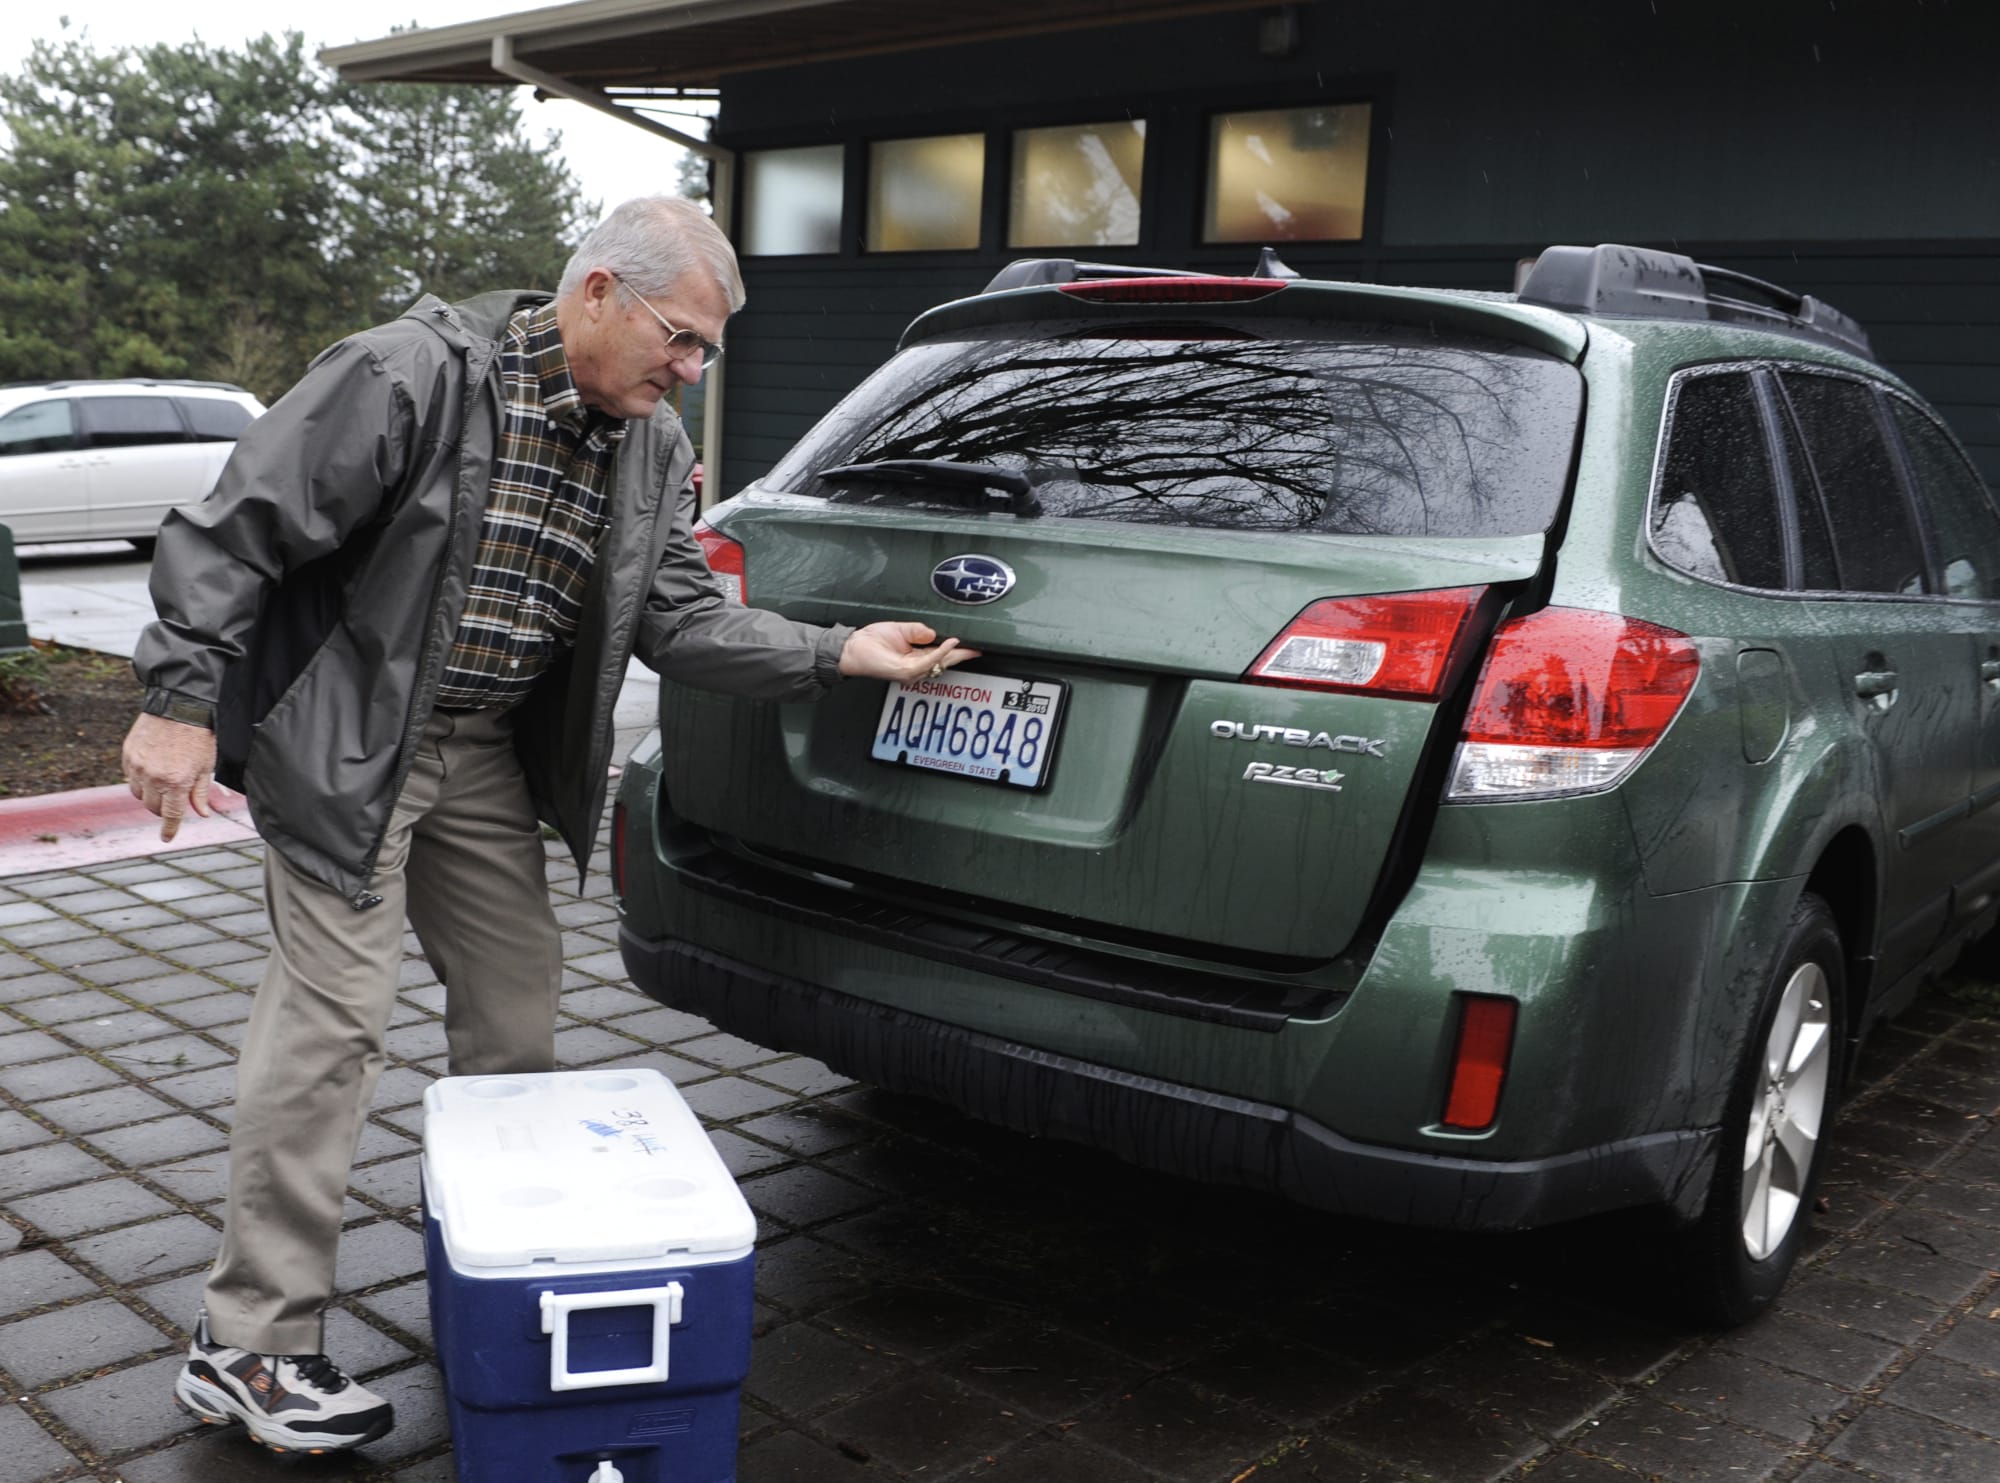 Vancouver City Councilor Larry Smith, who drives once a week for Meals on Wheels, loads his car at the Luepke Senior Center in Vancouver, Wa., Thursday., Dec 18, 2014.